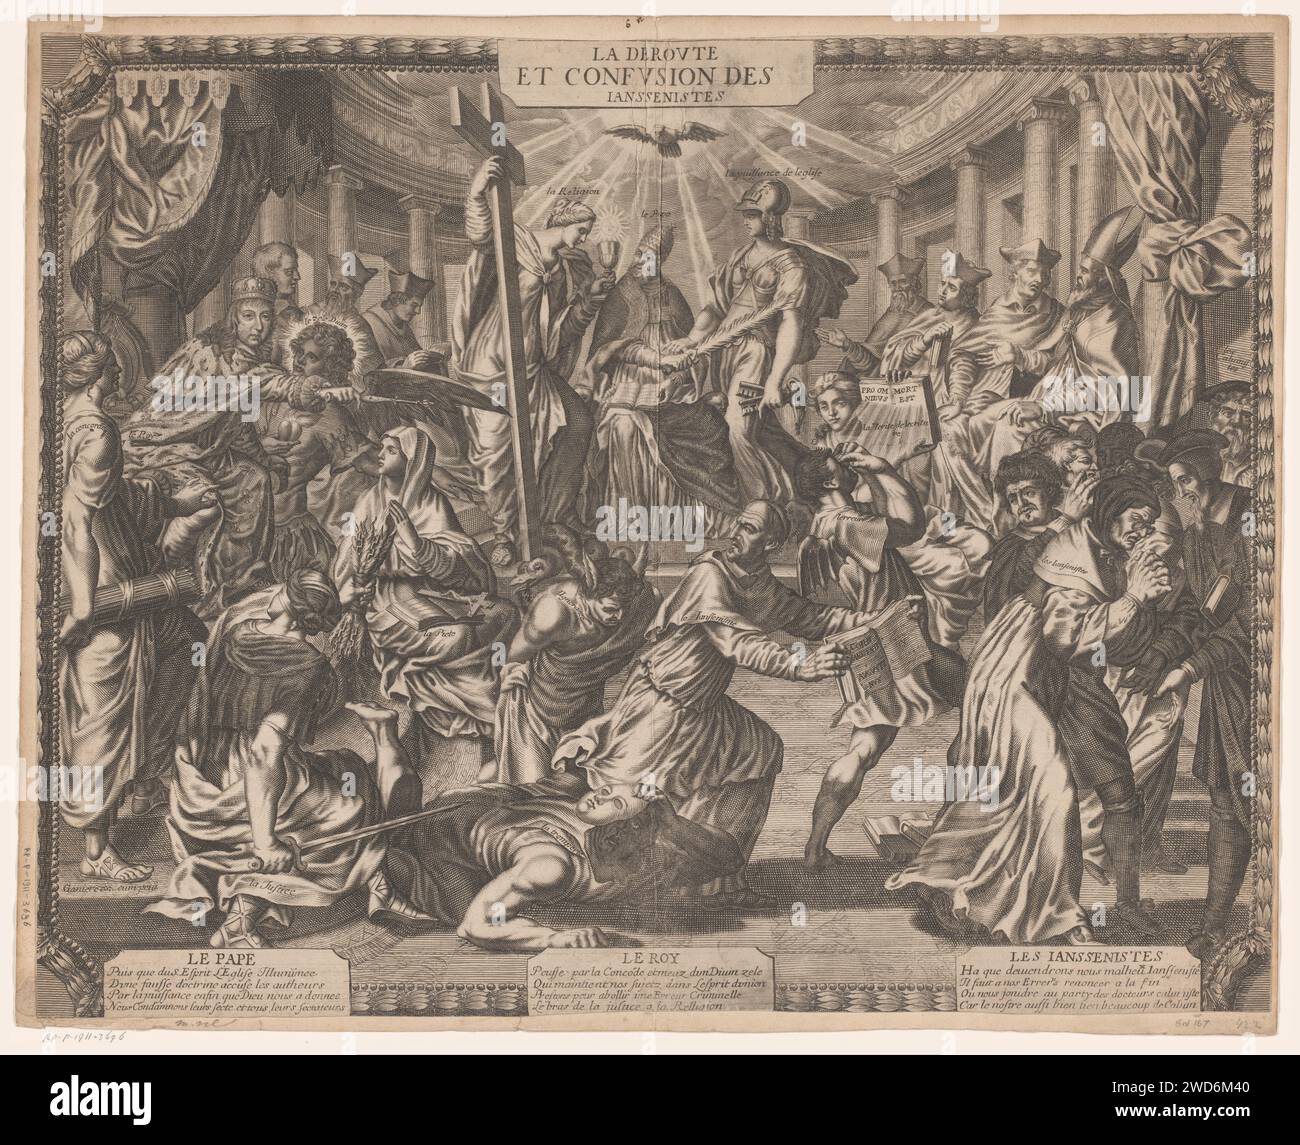 Adocht der Jansenisten, Anonymous, Jean Ganière, c. 1625 - 1666 print The pope in the middle of the top is flanked by the allegorical figures religion and ecclesiastical power. The Holy Spirit flies above him. On the left the king sits on a throne with next to him the Divine zeal, the Eendracht, the righteousness and piety. The king banishes the allegorical figures ignorance, misunderstanding and deception with Jansenism in the middle with 'the Augustine' in his hands, preceded by Jansenists. France paper engraving pope. king. suspension, expulsion (from a society) Stock Photo